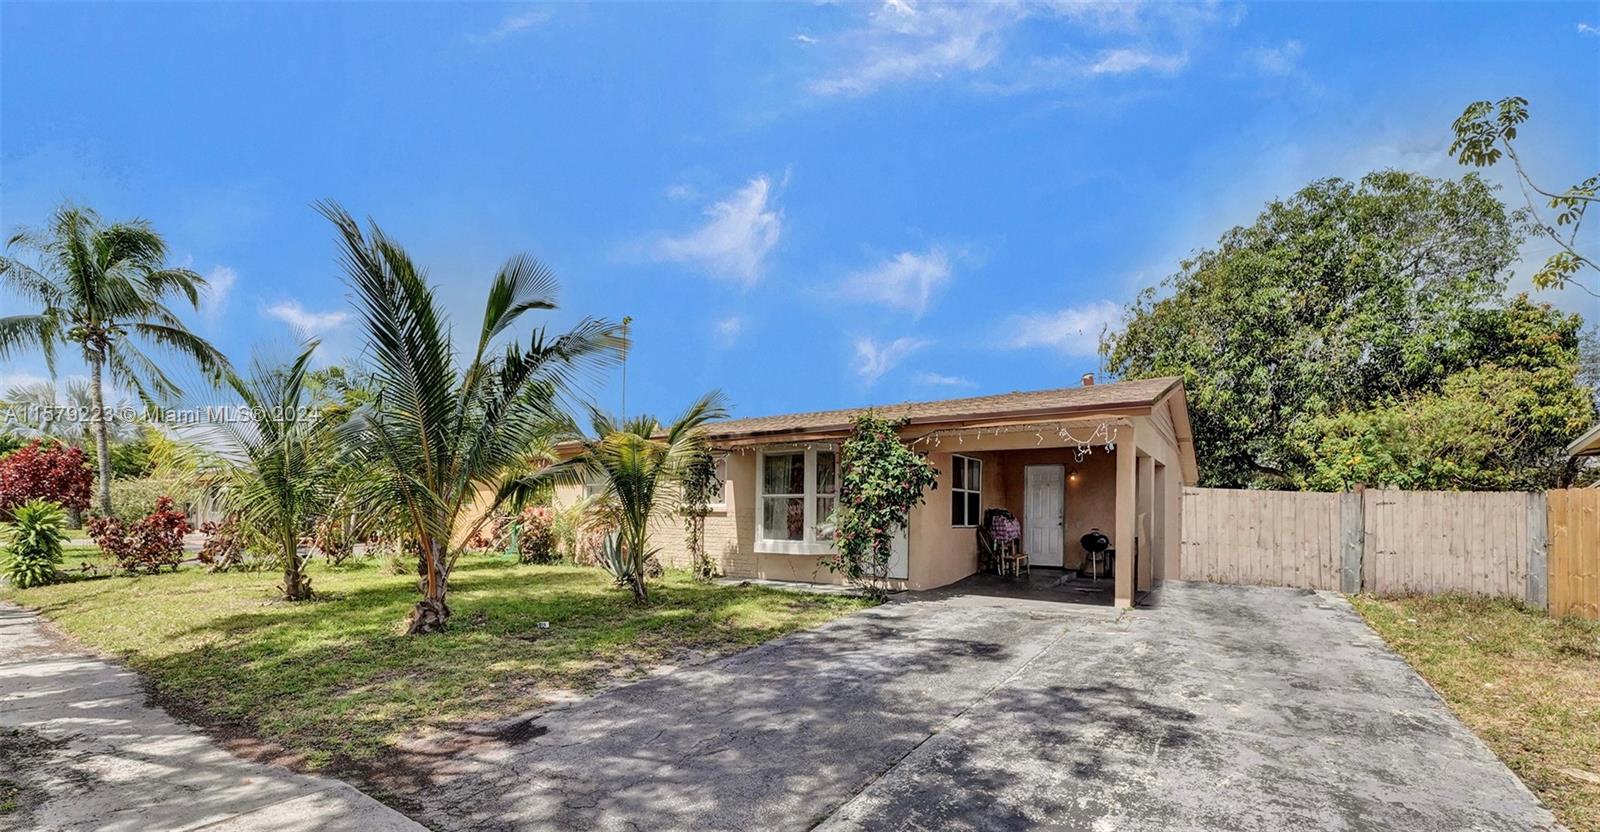 Property for Sale at 1731 Nw 27th Ave, Fort Lauderdale, Broward County, Florida - Bedrooms: 3 
Bathrooms: 2  - $375,000